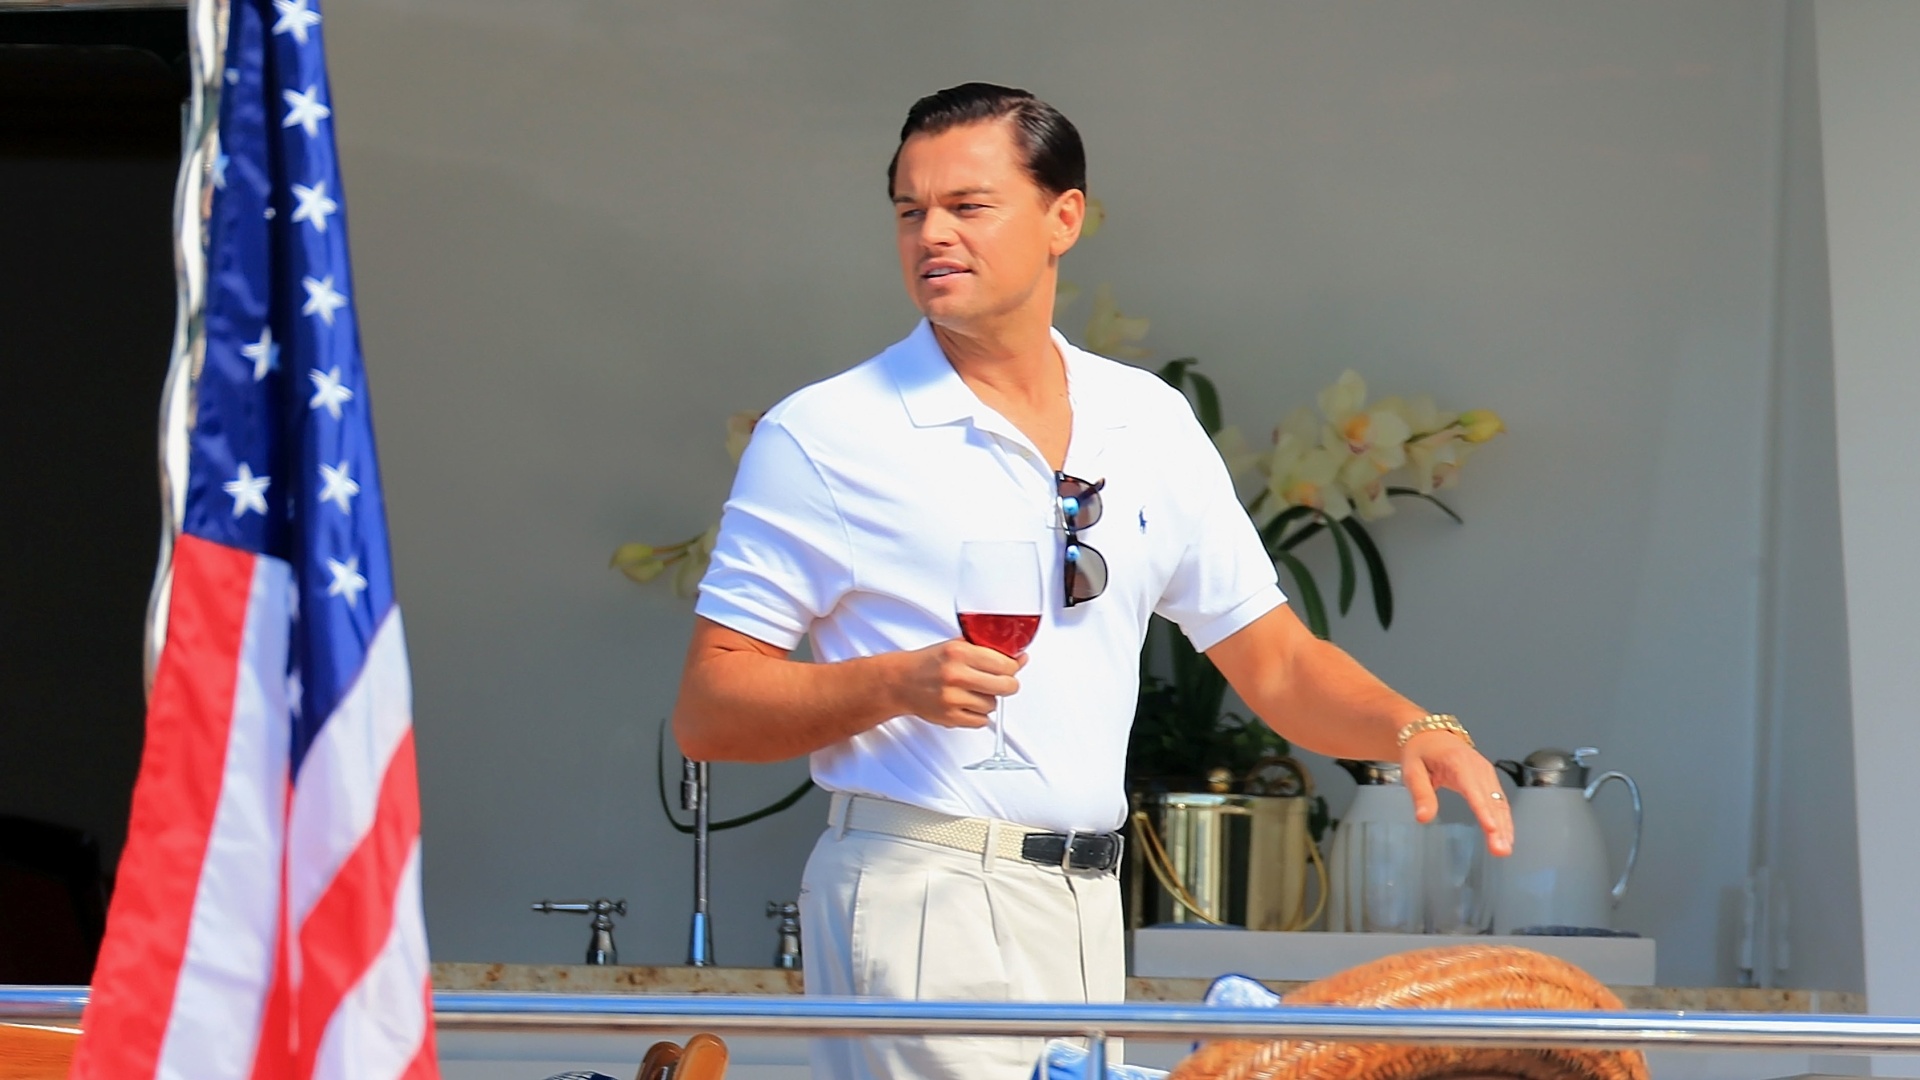 the wolf of wall street download